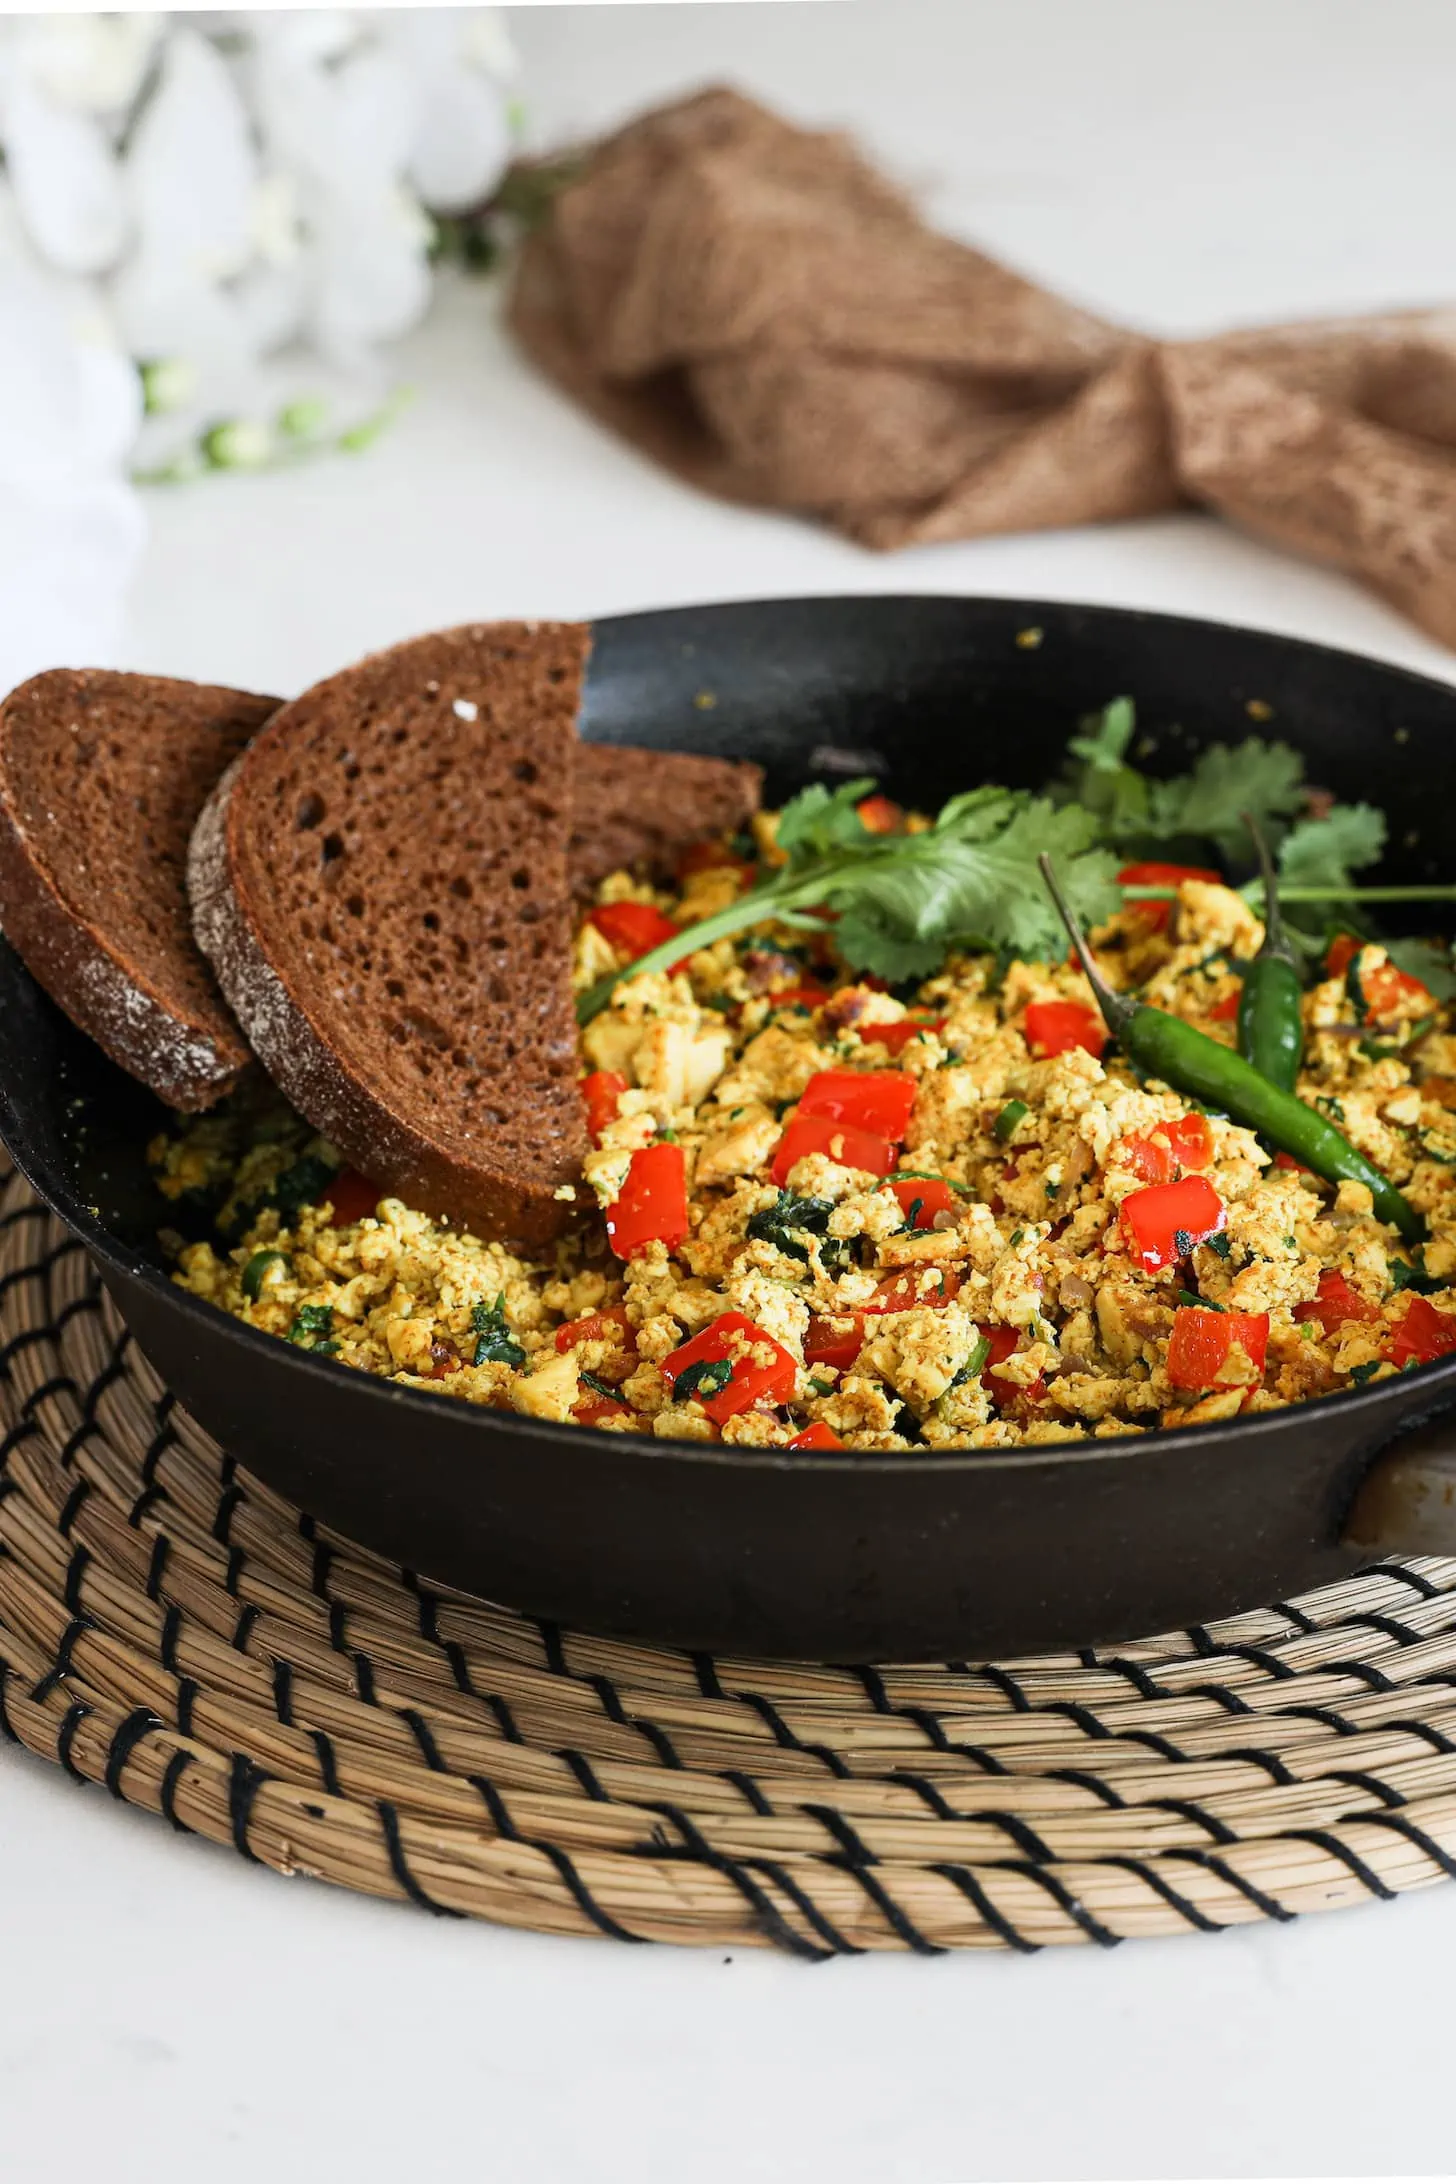 A fry pan of scramble with red pepper cubes topped with cilantro and green chilli and two slices of pumpernickel bread placed on top.